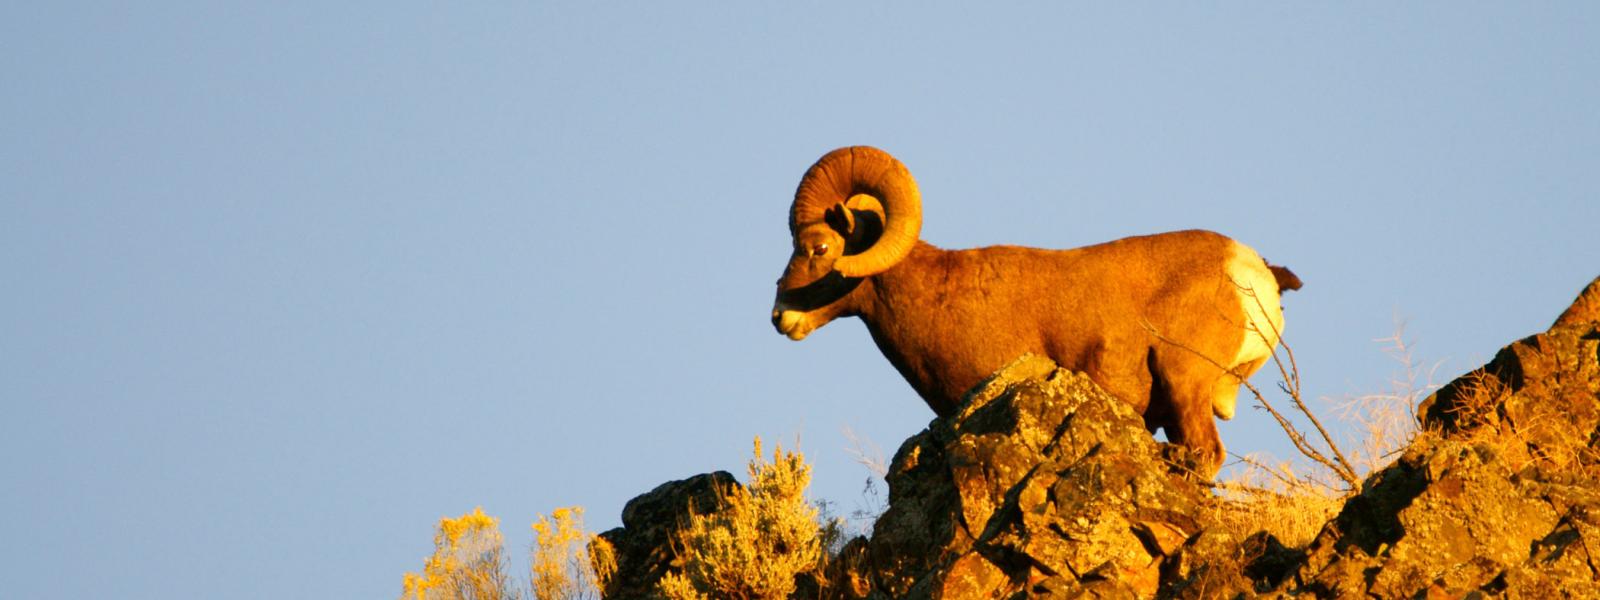 A bighorn sheep ram standing high on a rocky outcropping, with a blue sky behind and the sun painting an orange hue